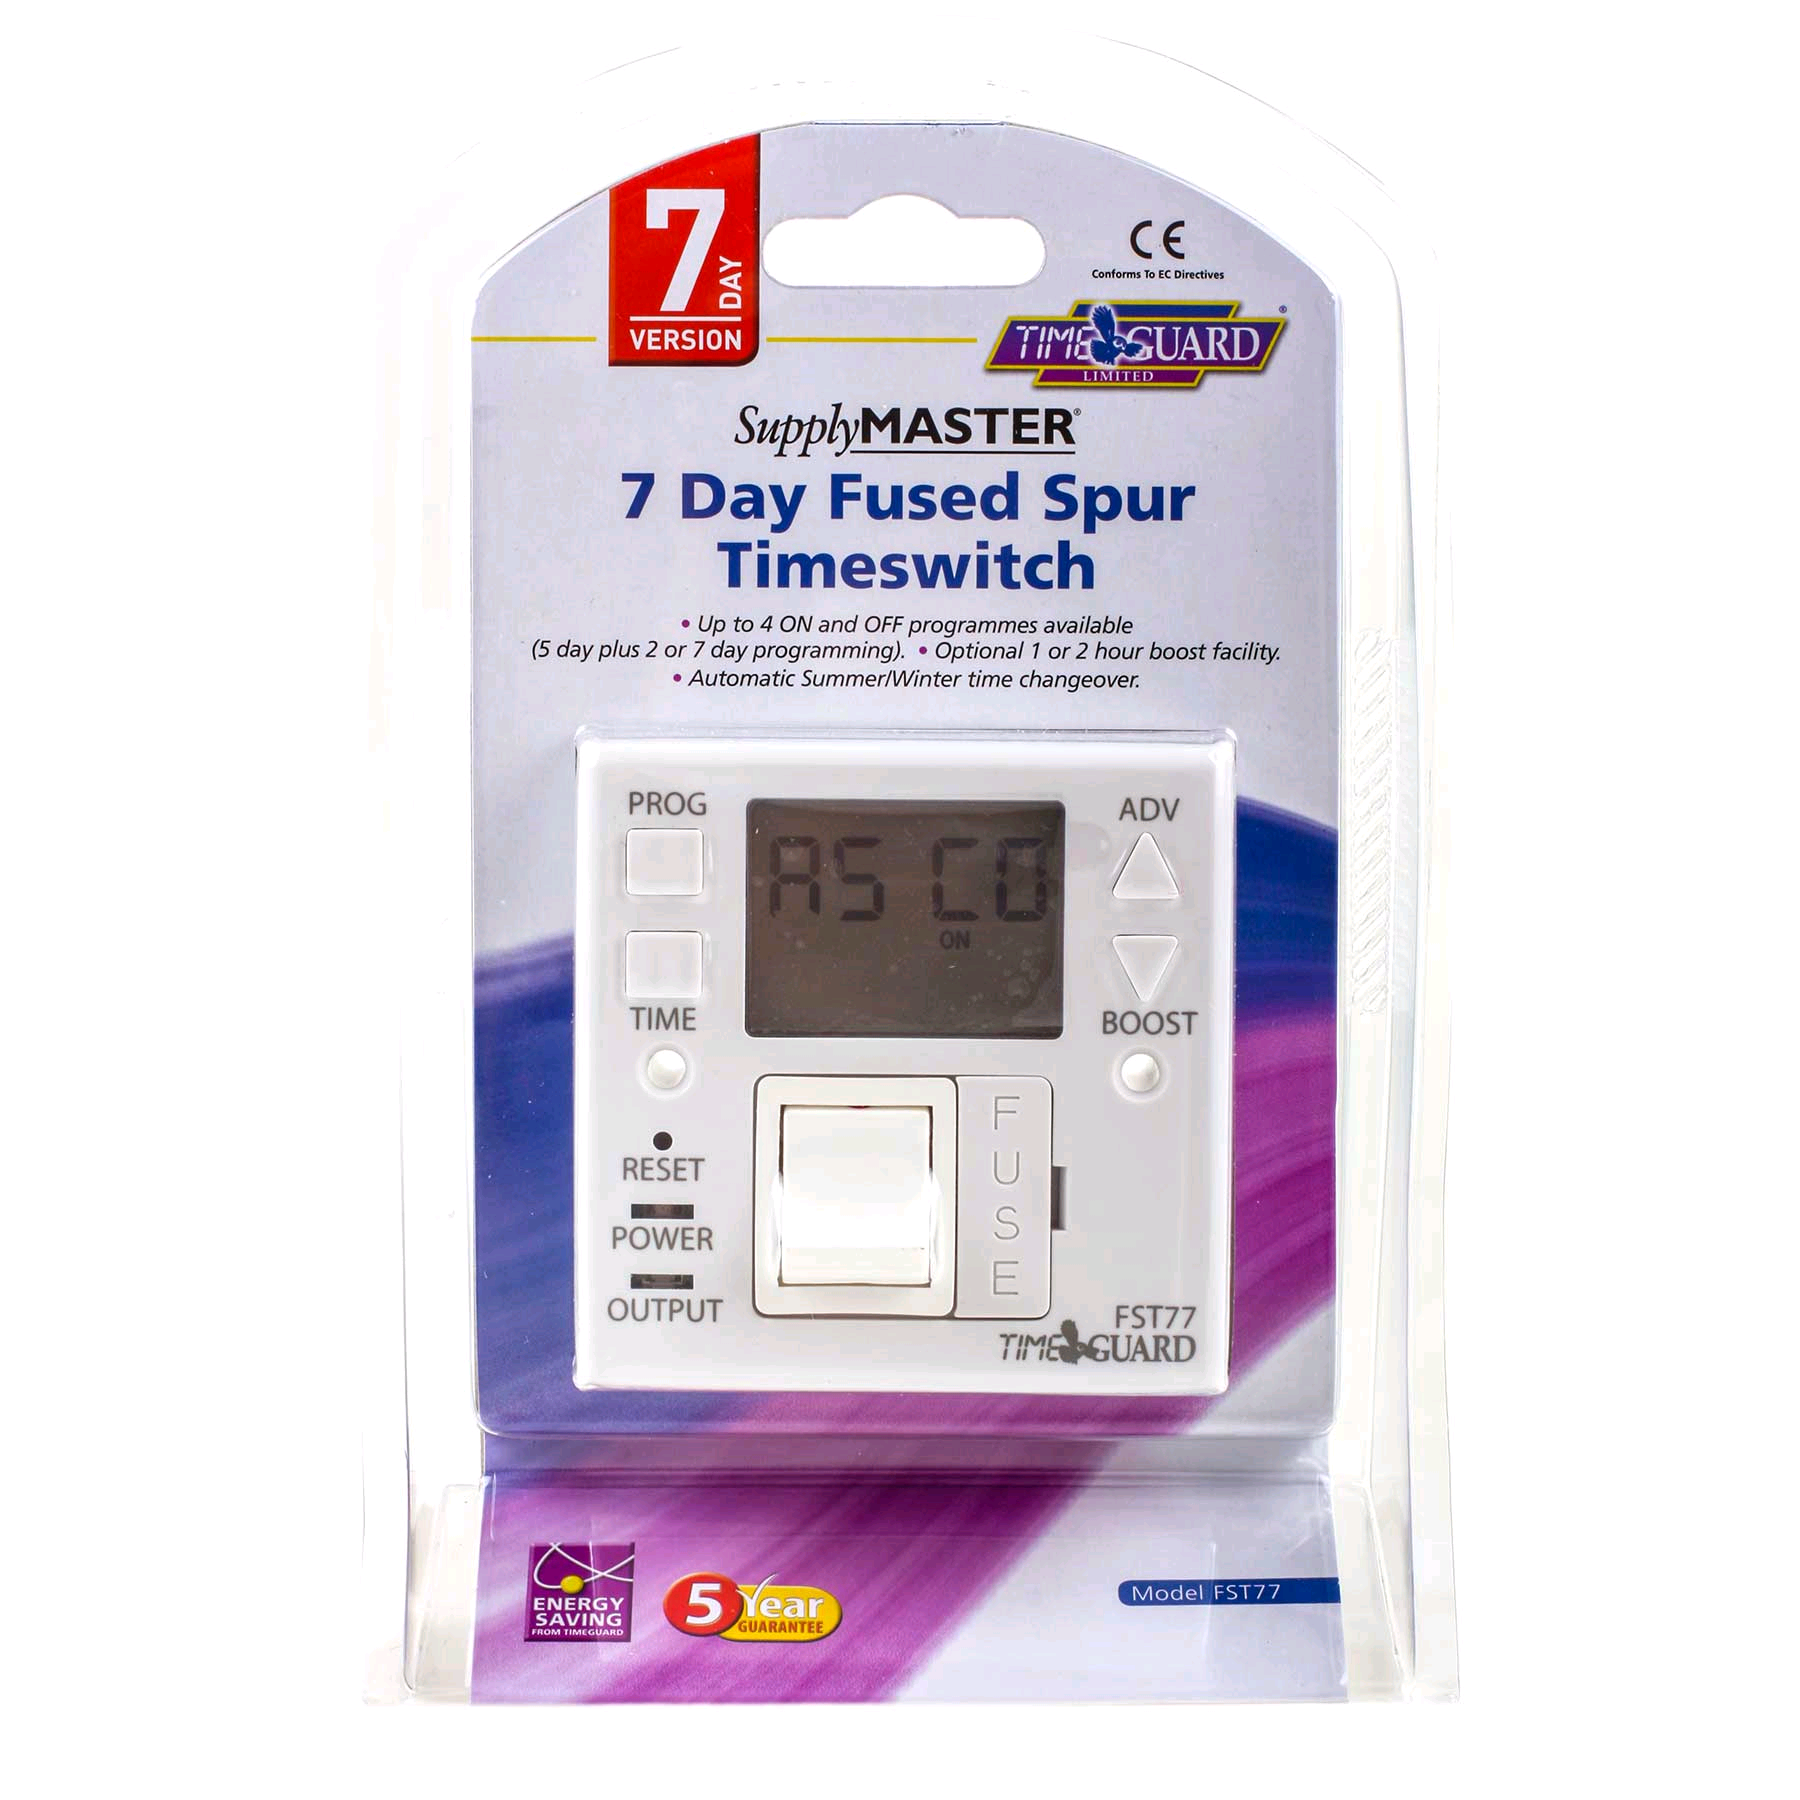 Timeguard 7 Day Fused Spur Timeswitch 